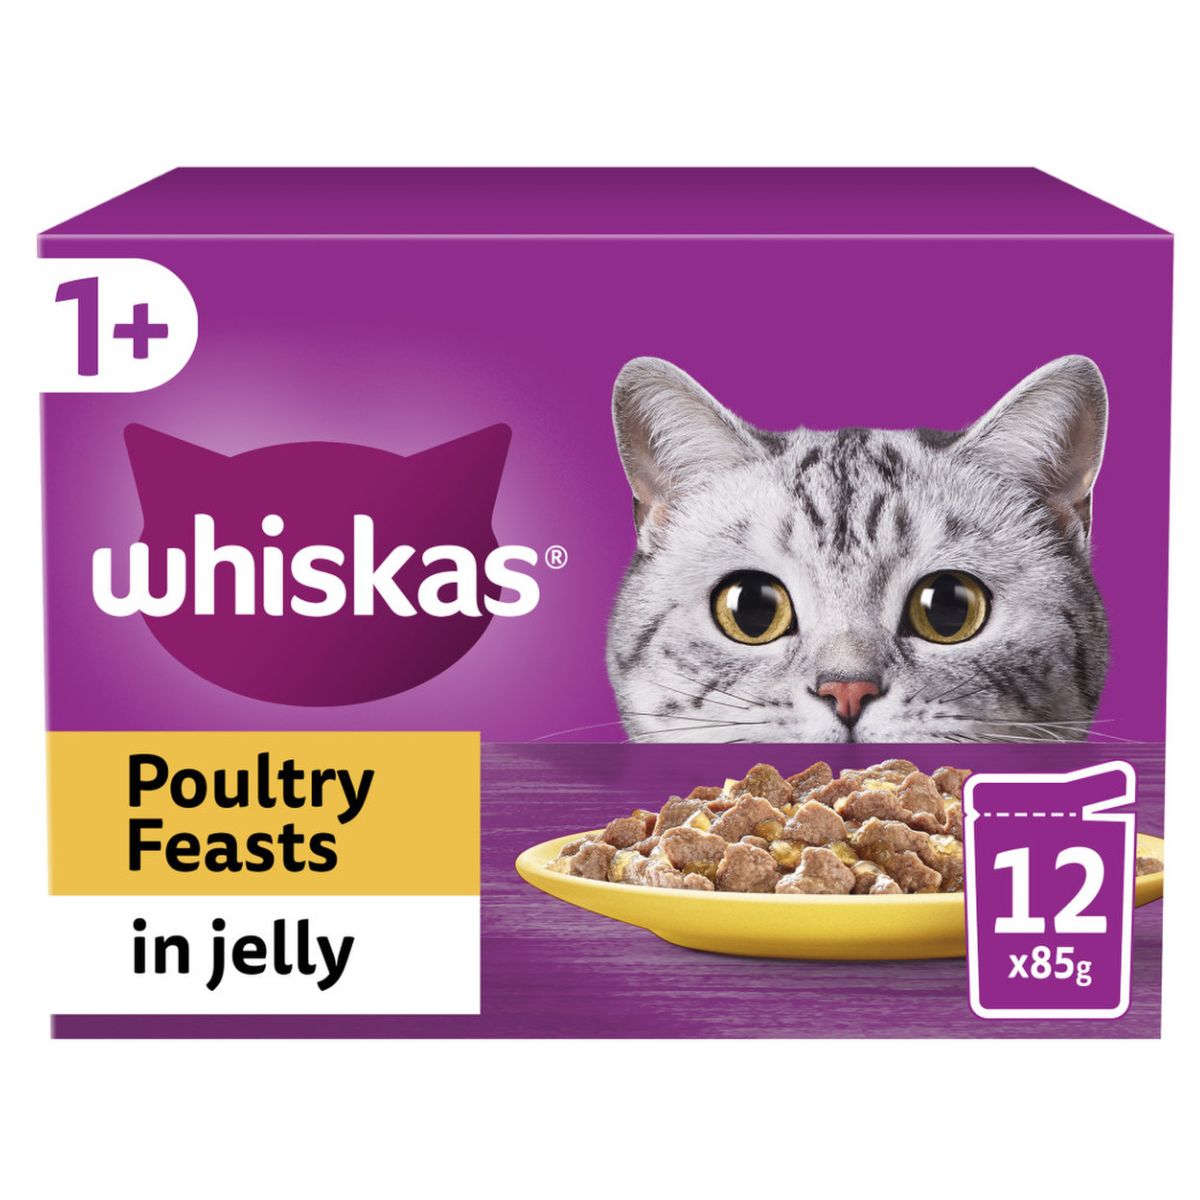 Whiskas 7+ Poultry Feasts Senior Wet Cat Food Pouches in Jelly - 12 x 85g cat food.